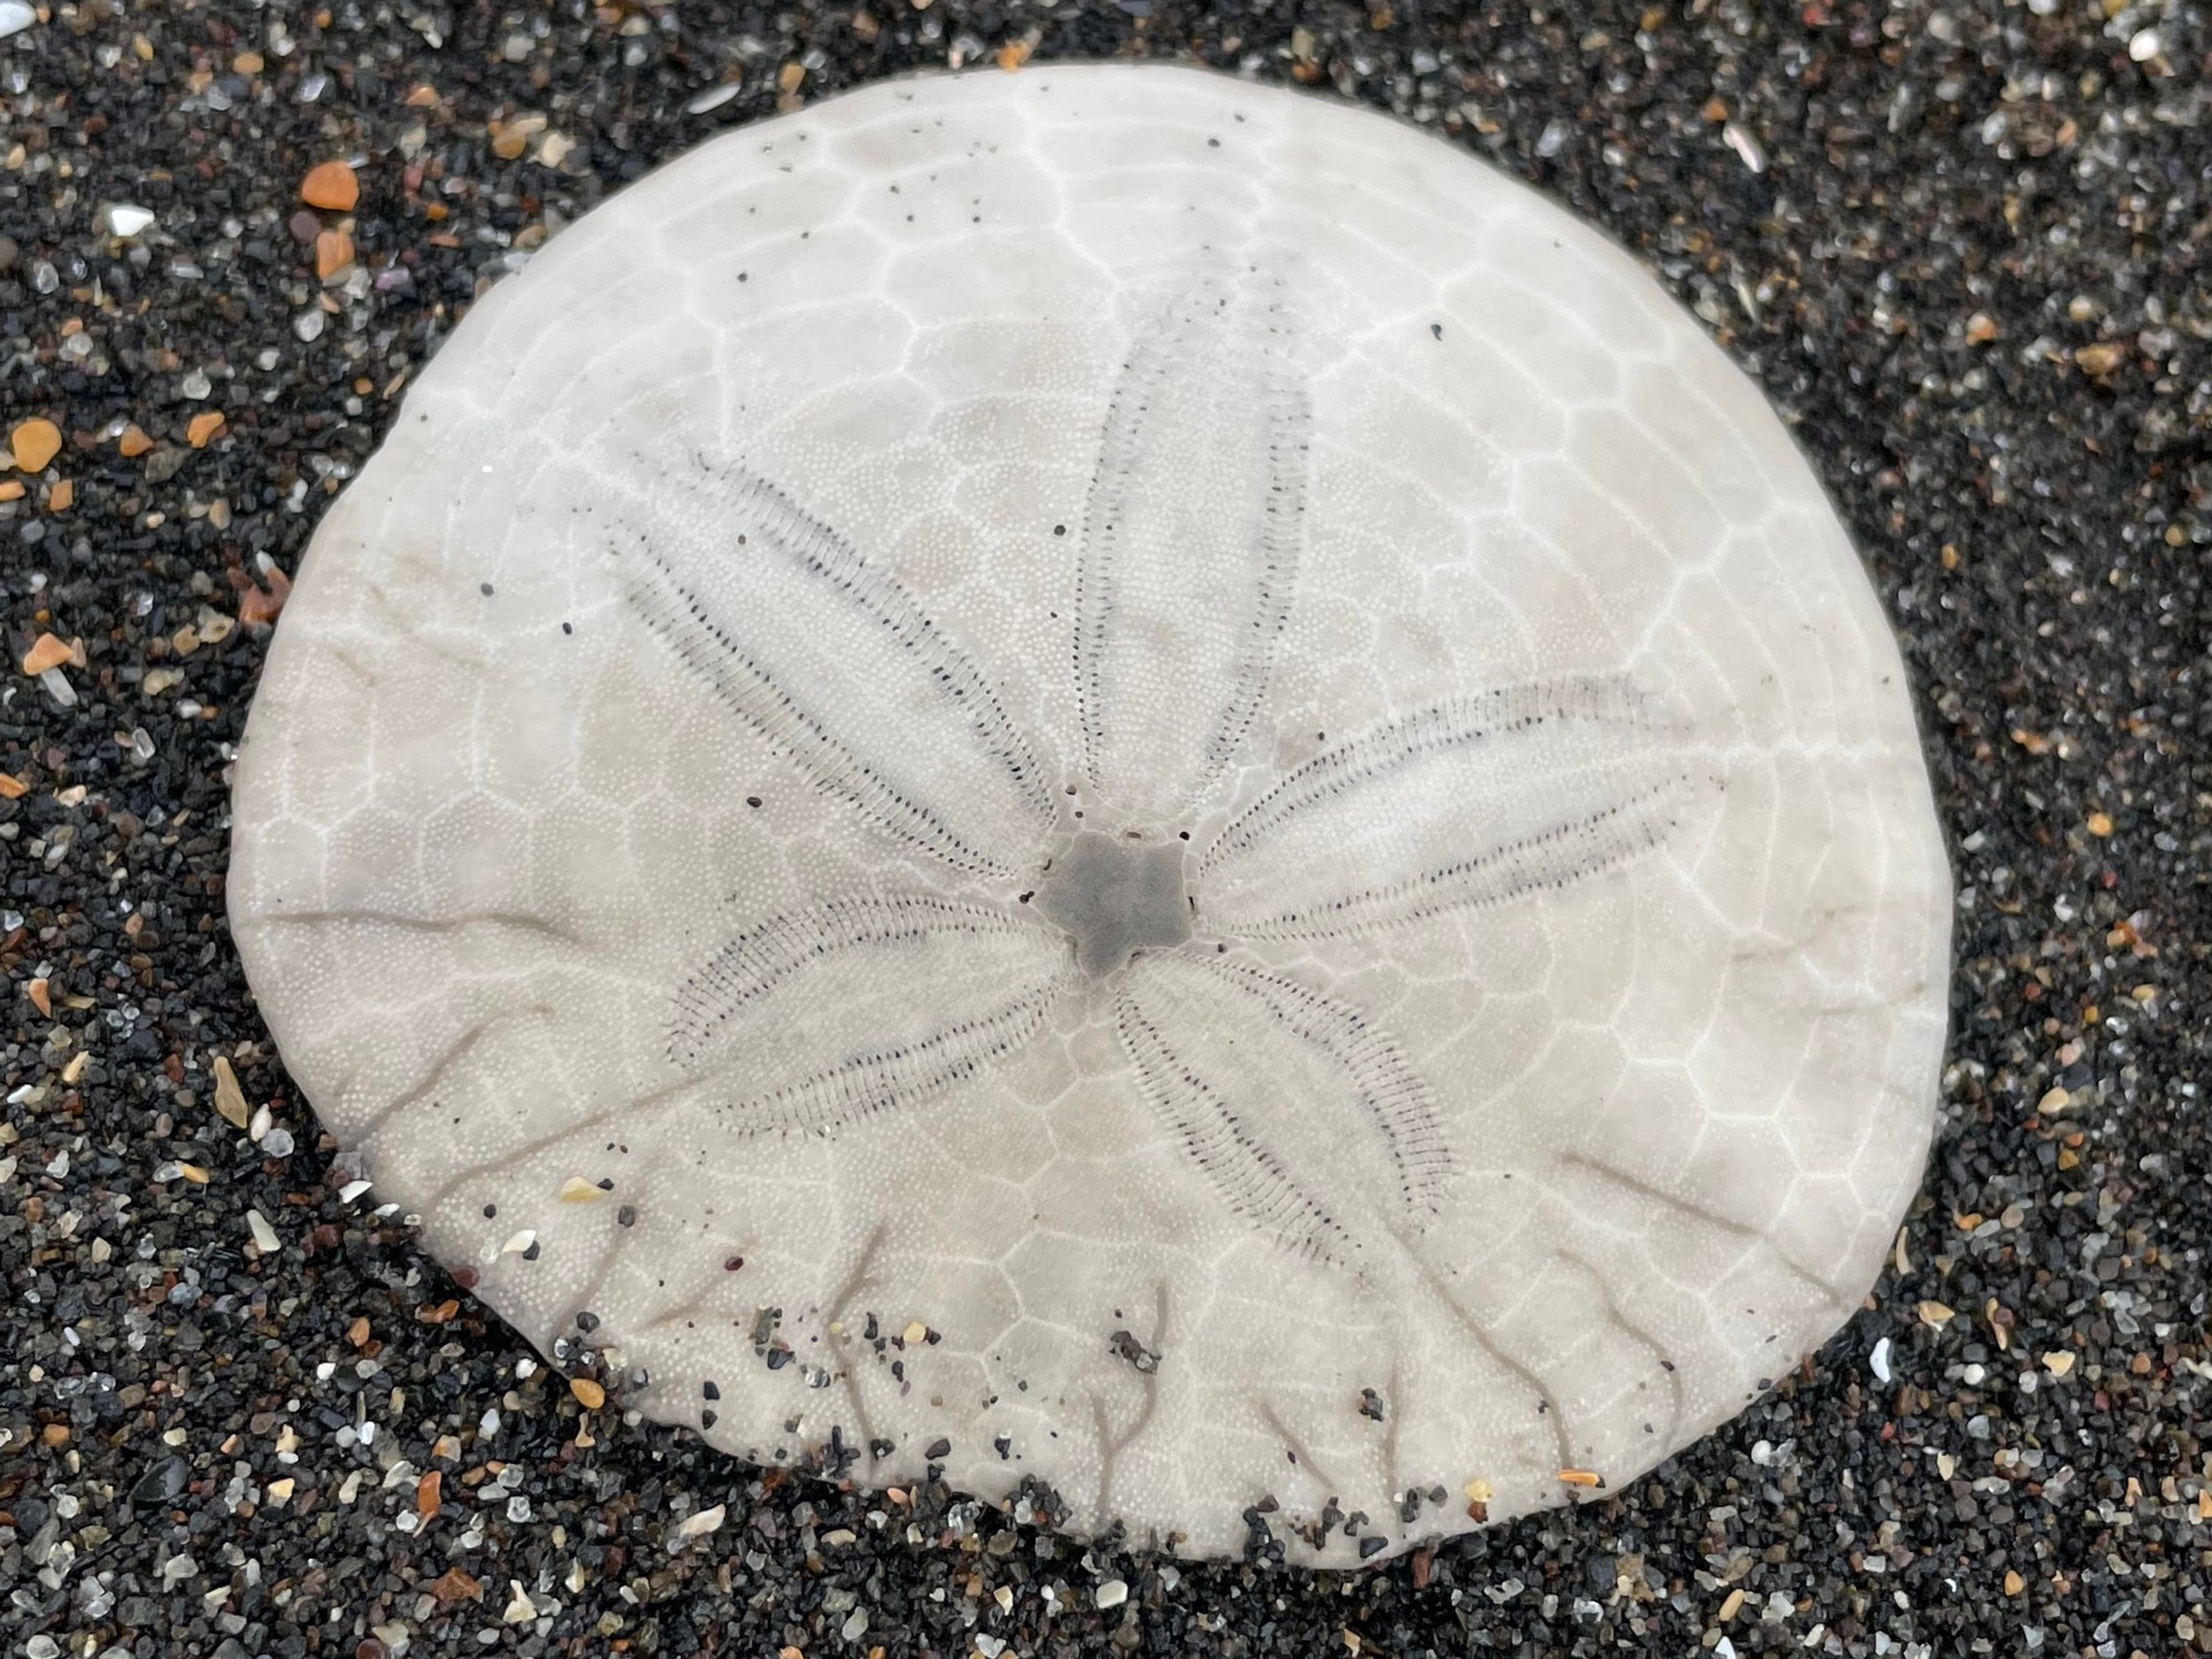 A close up of a sand dollar laying in black sand.